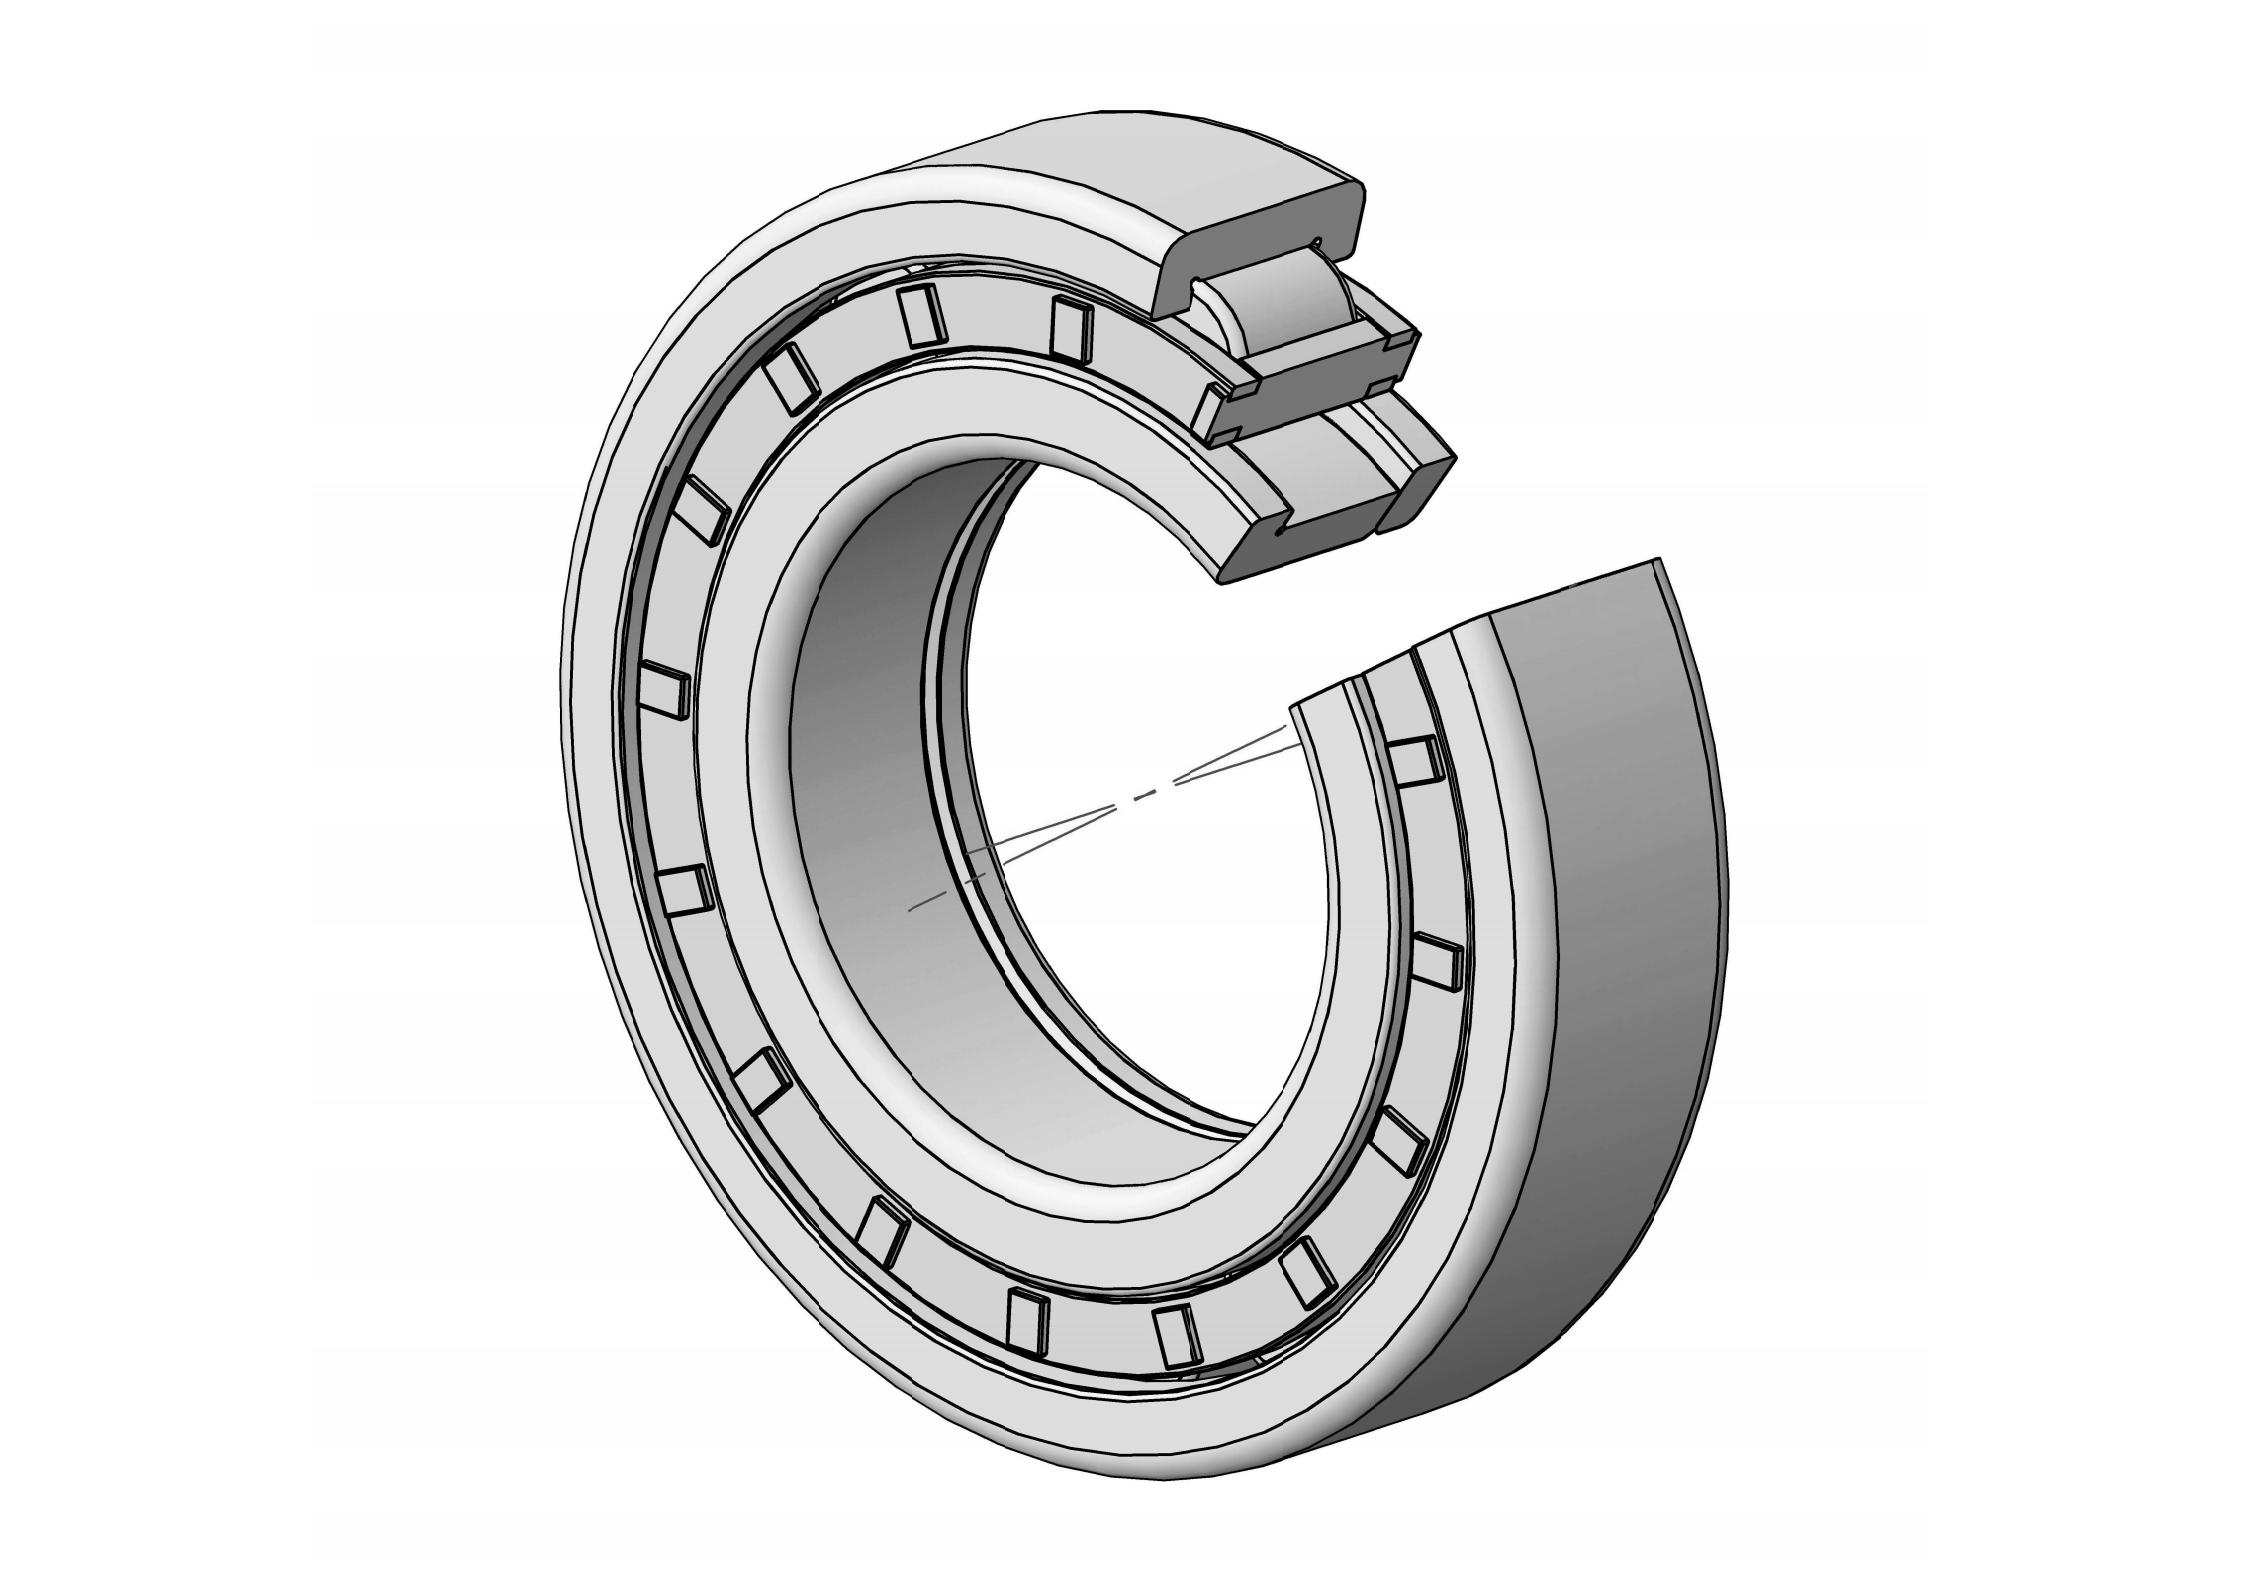 NUP2217-EM Single Row Cylindrical roller bearing 